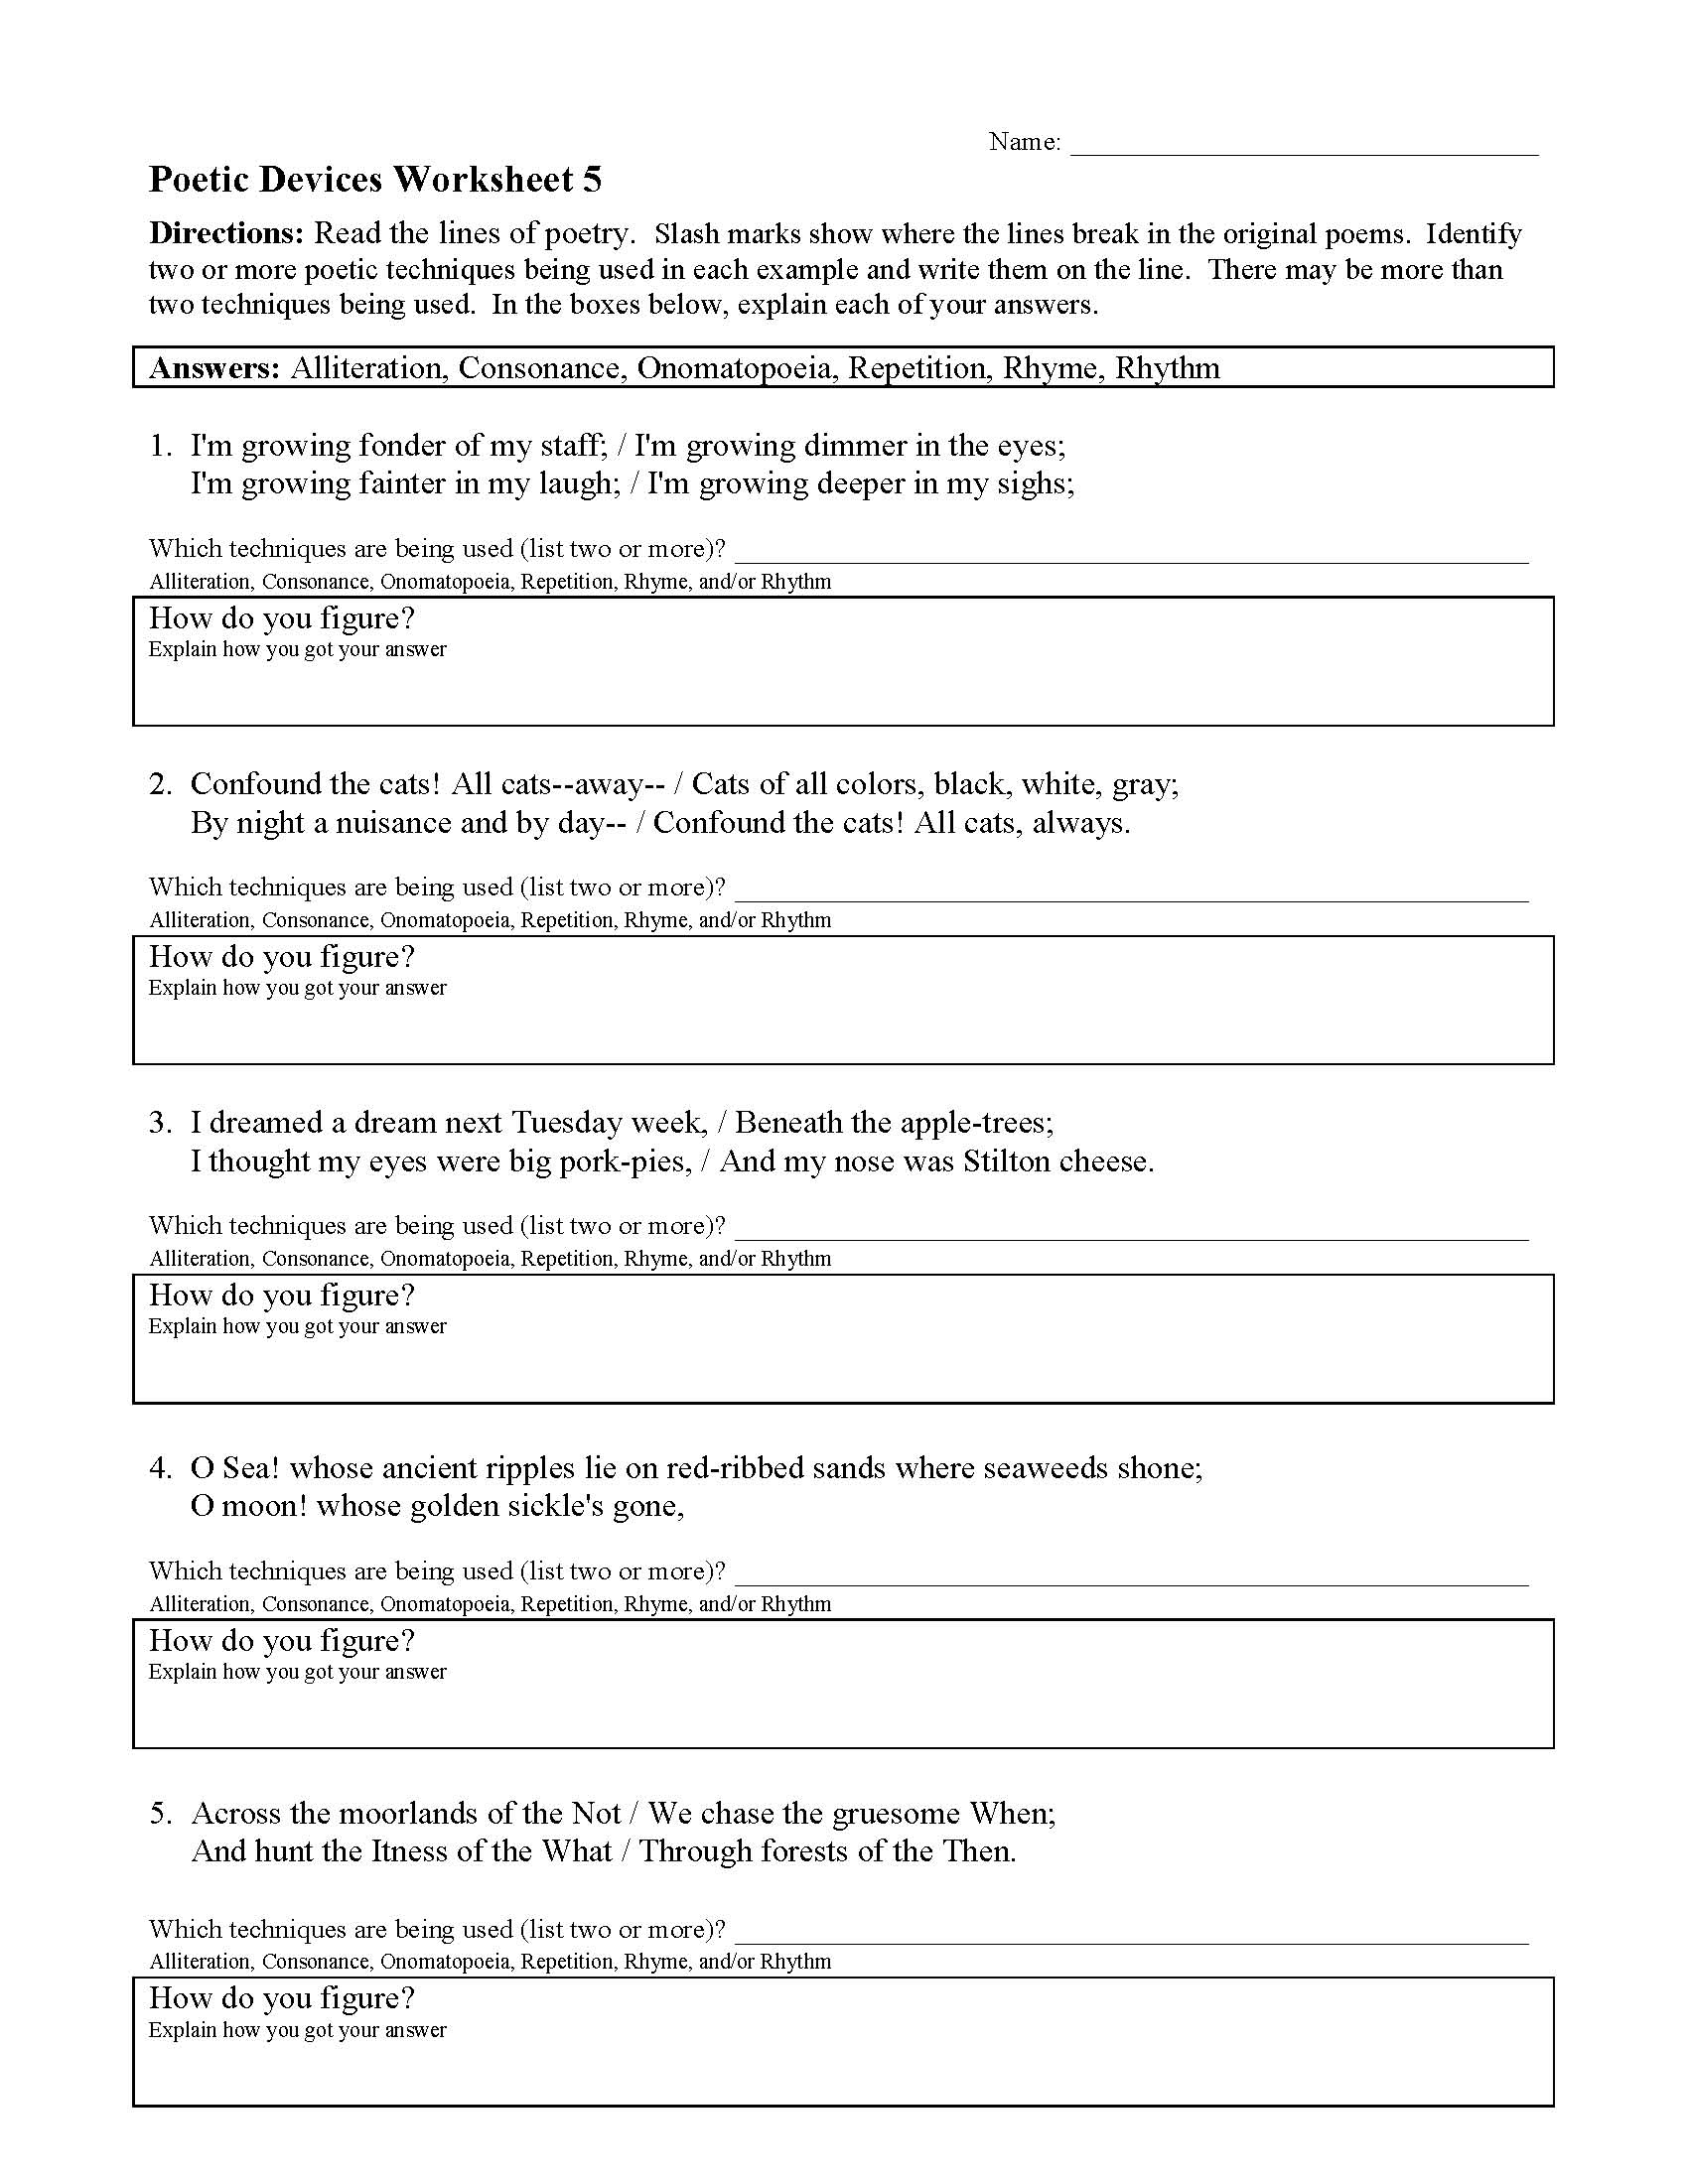 Poetic Devices Worksheet 11  Reading Activity With Literary Devices Worksheet Pdf